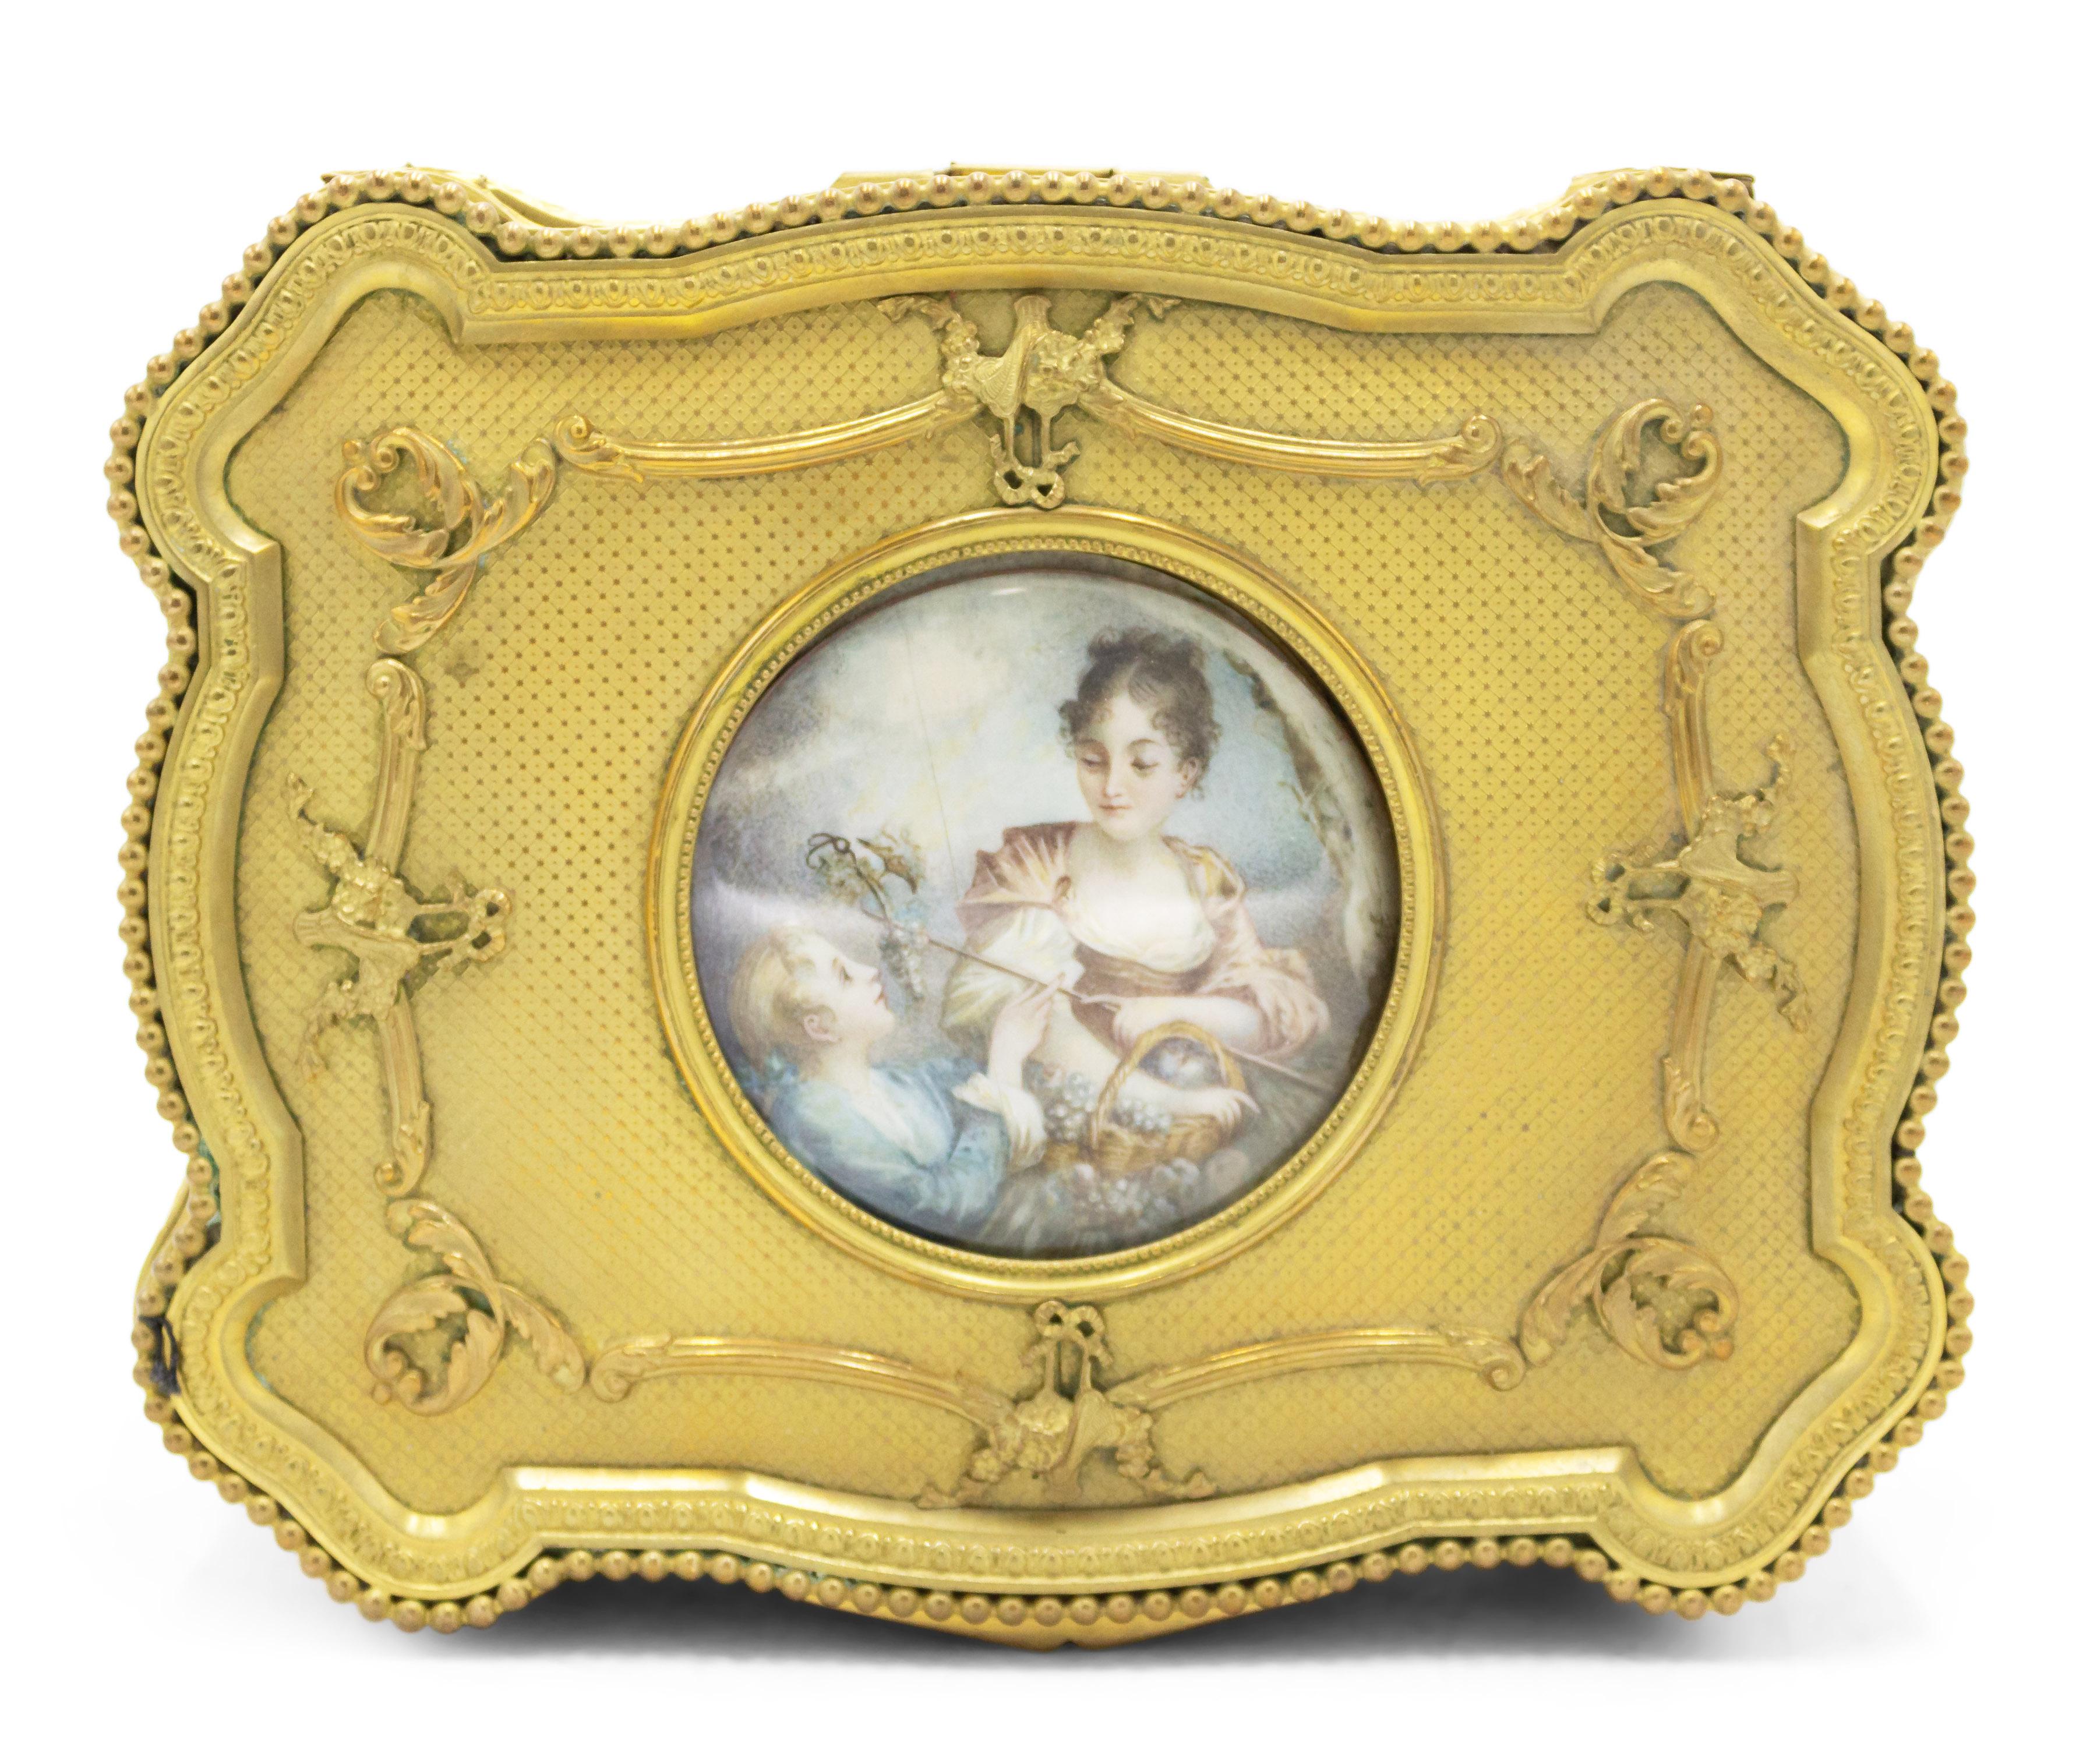 French Louis XVI-style (19/20th century) bronze dore rectangular shaped jewel box with round plaque of lady and man.
    